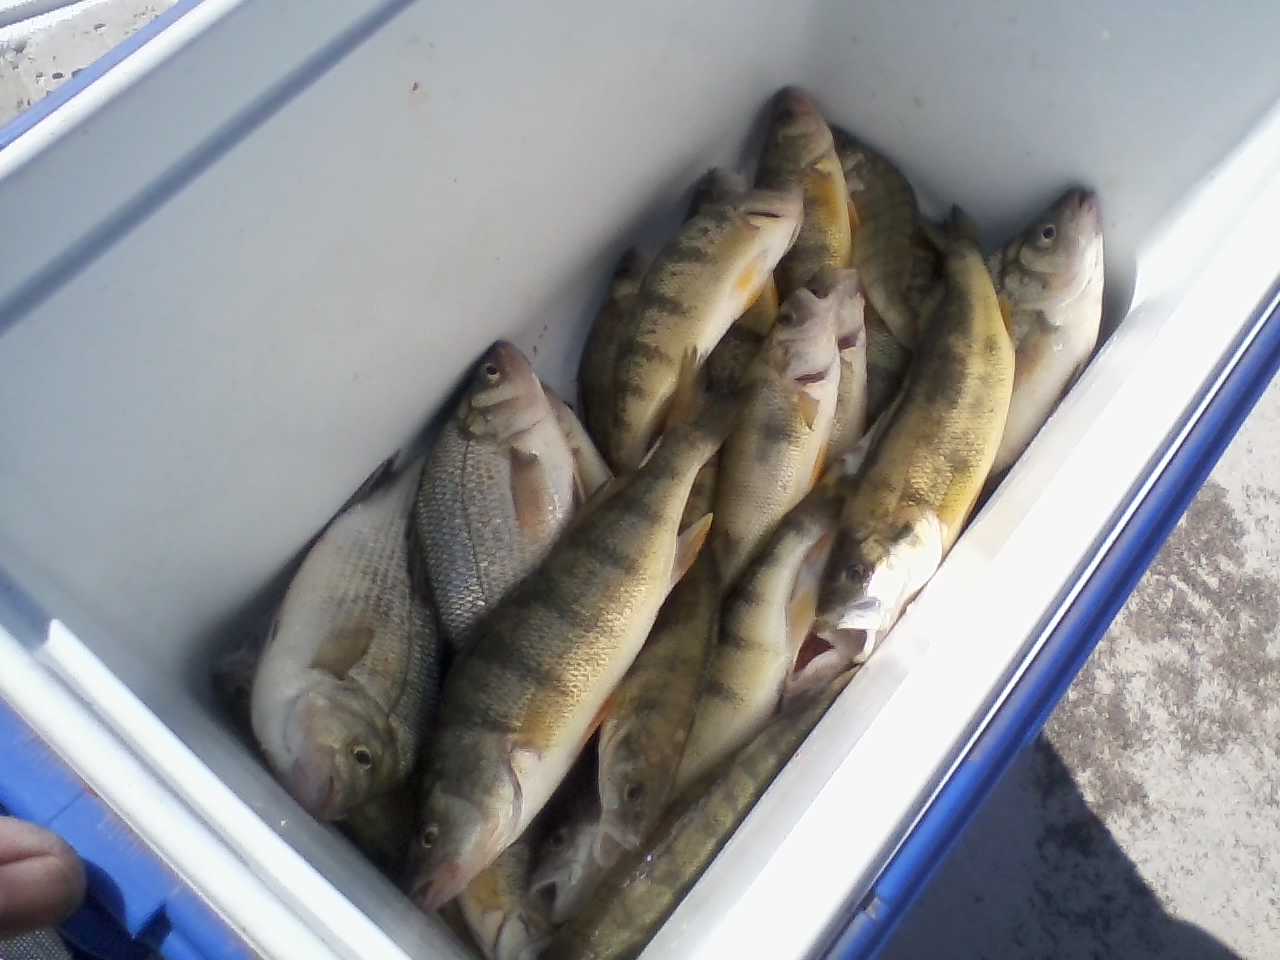 First good day of the 2023 season. May 24. 19 yellows and 3 white perch came home.jpg